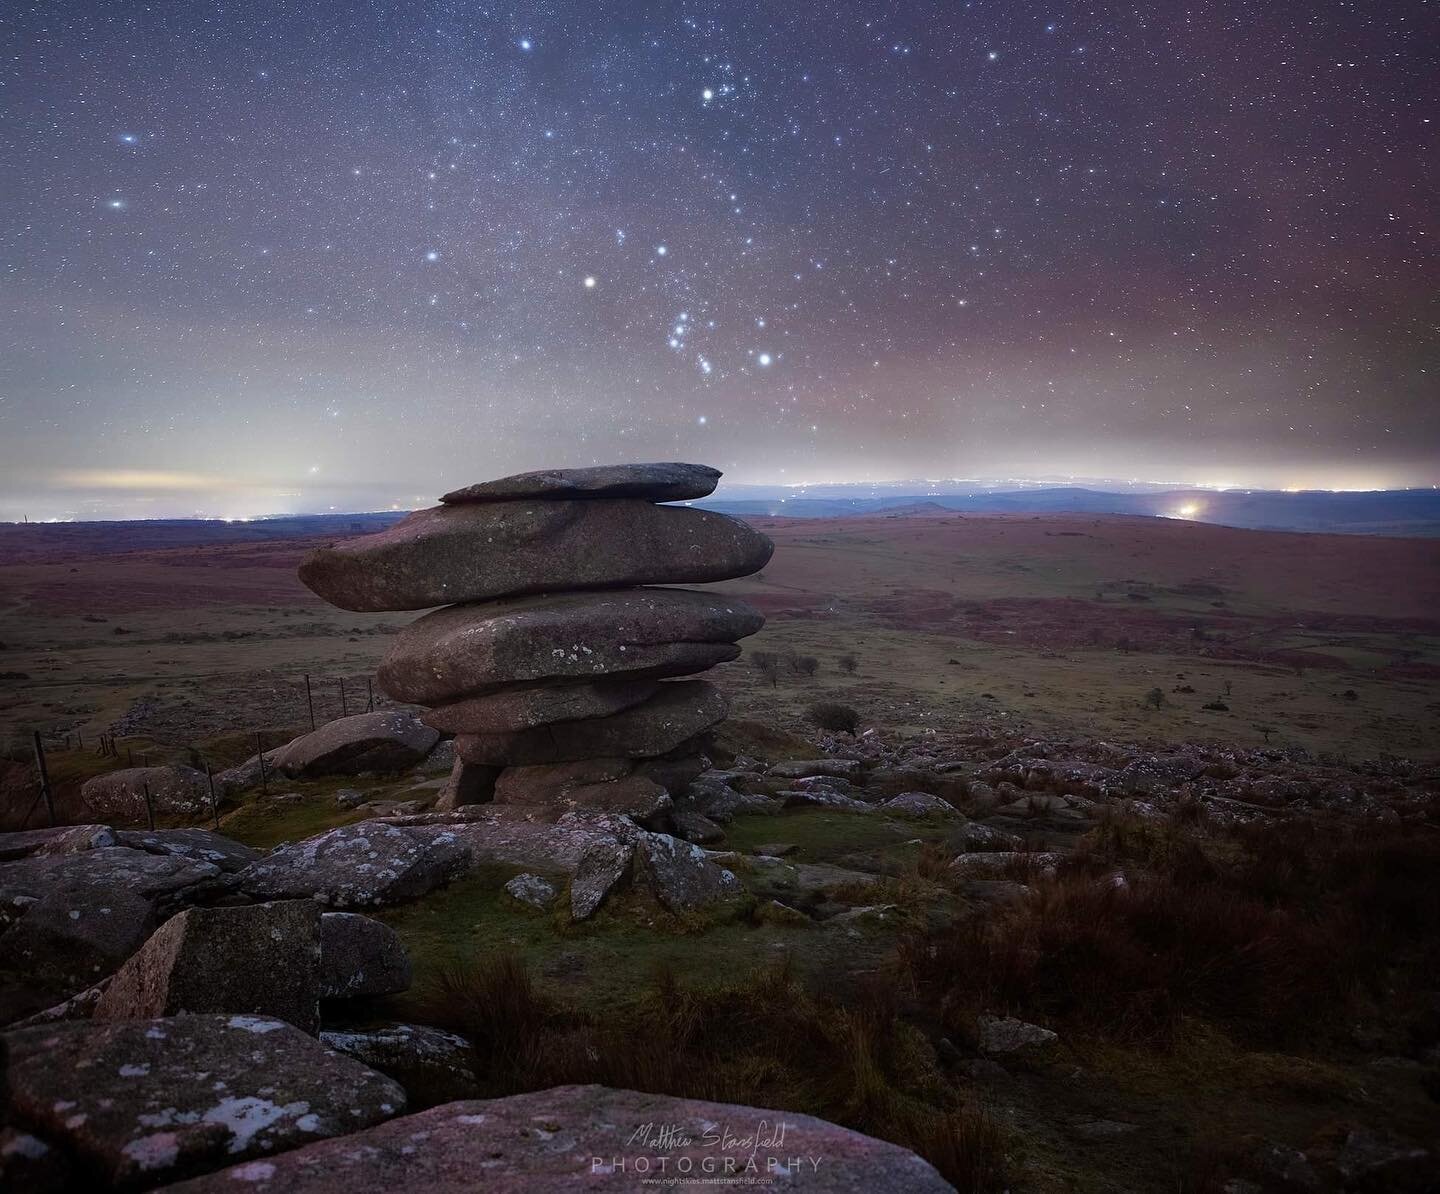 Cheesewring - Bodmin
Web: www.nightskies.mattstansfield.com

This is probably going to be the final image I share from last Sunday night.  I have visited this rocky stack many times, and it continues to surprise me to how it's still standing. A strik